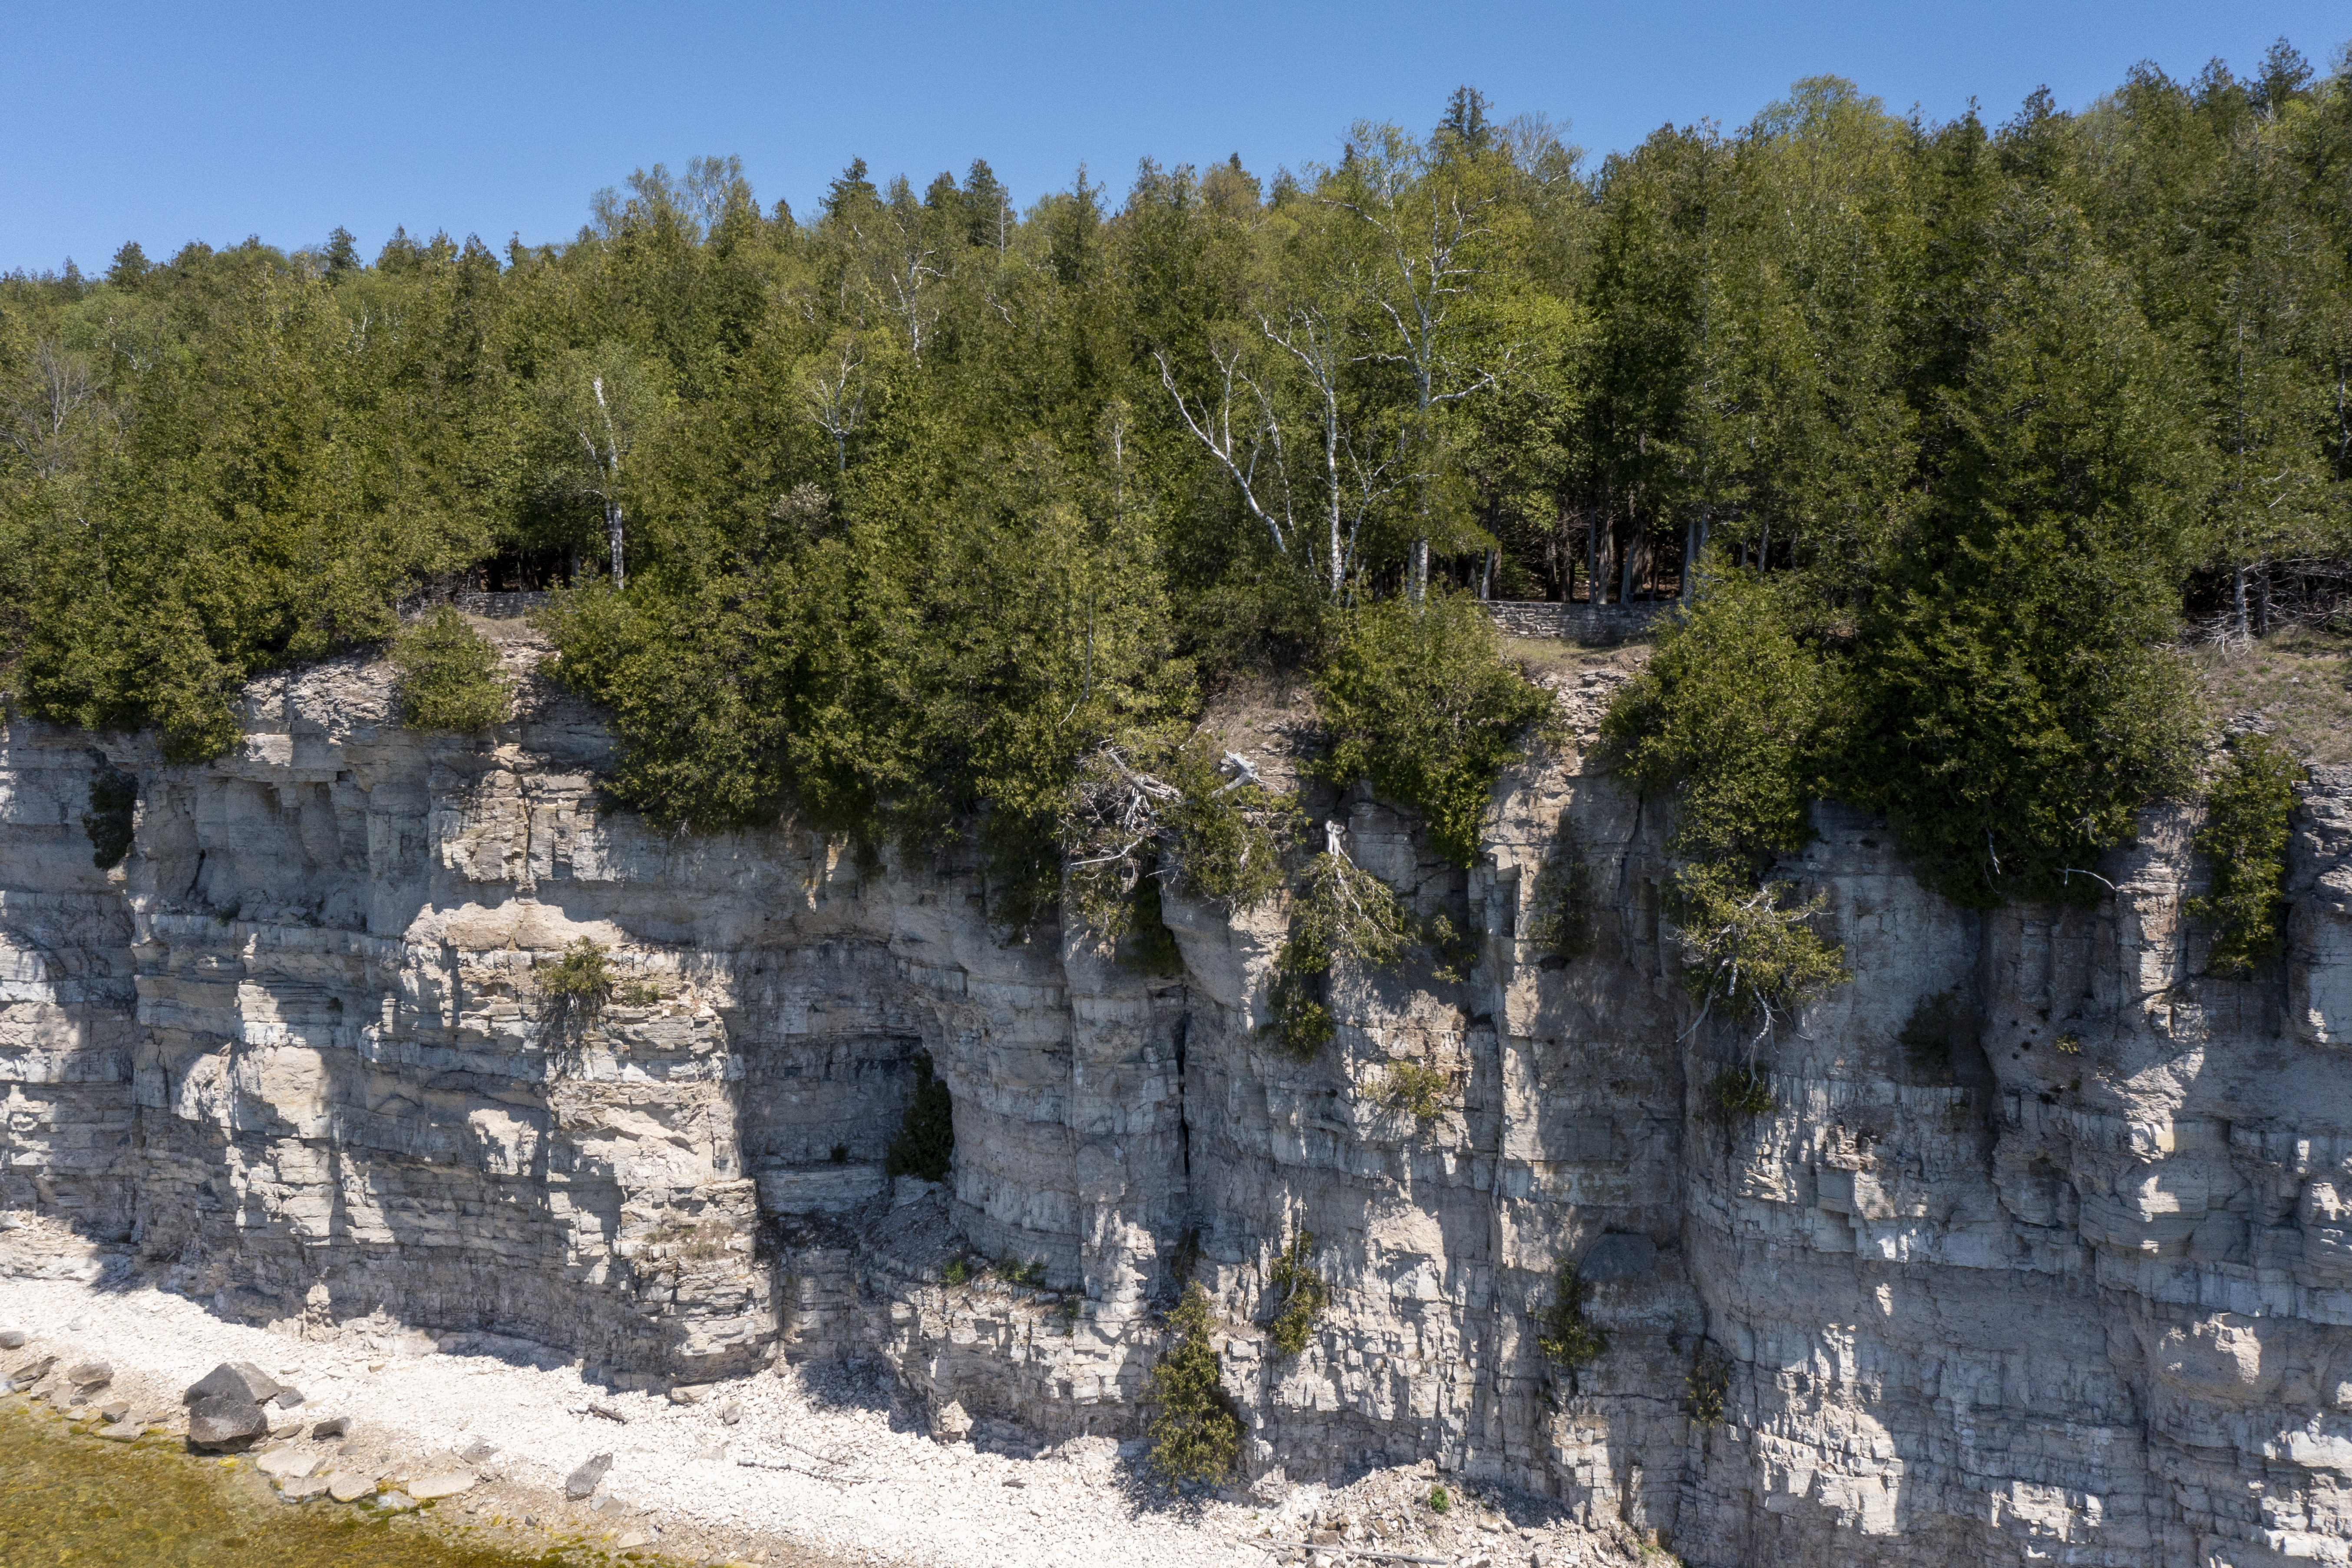 White dolomite limestone cliffs along Lake Michigan at Fayette Historic State Park near Garden on Tuesday, May 17, 2022. The scraggly white cedars growing from the cliff face are among the slowest-growing trees in the world and some are estimated to be more than 1,400 years old, according to research from the University of Guelph in Ontario. (Drone image by Cory Morse | MLive.com)
